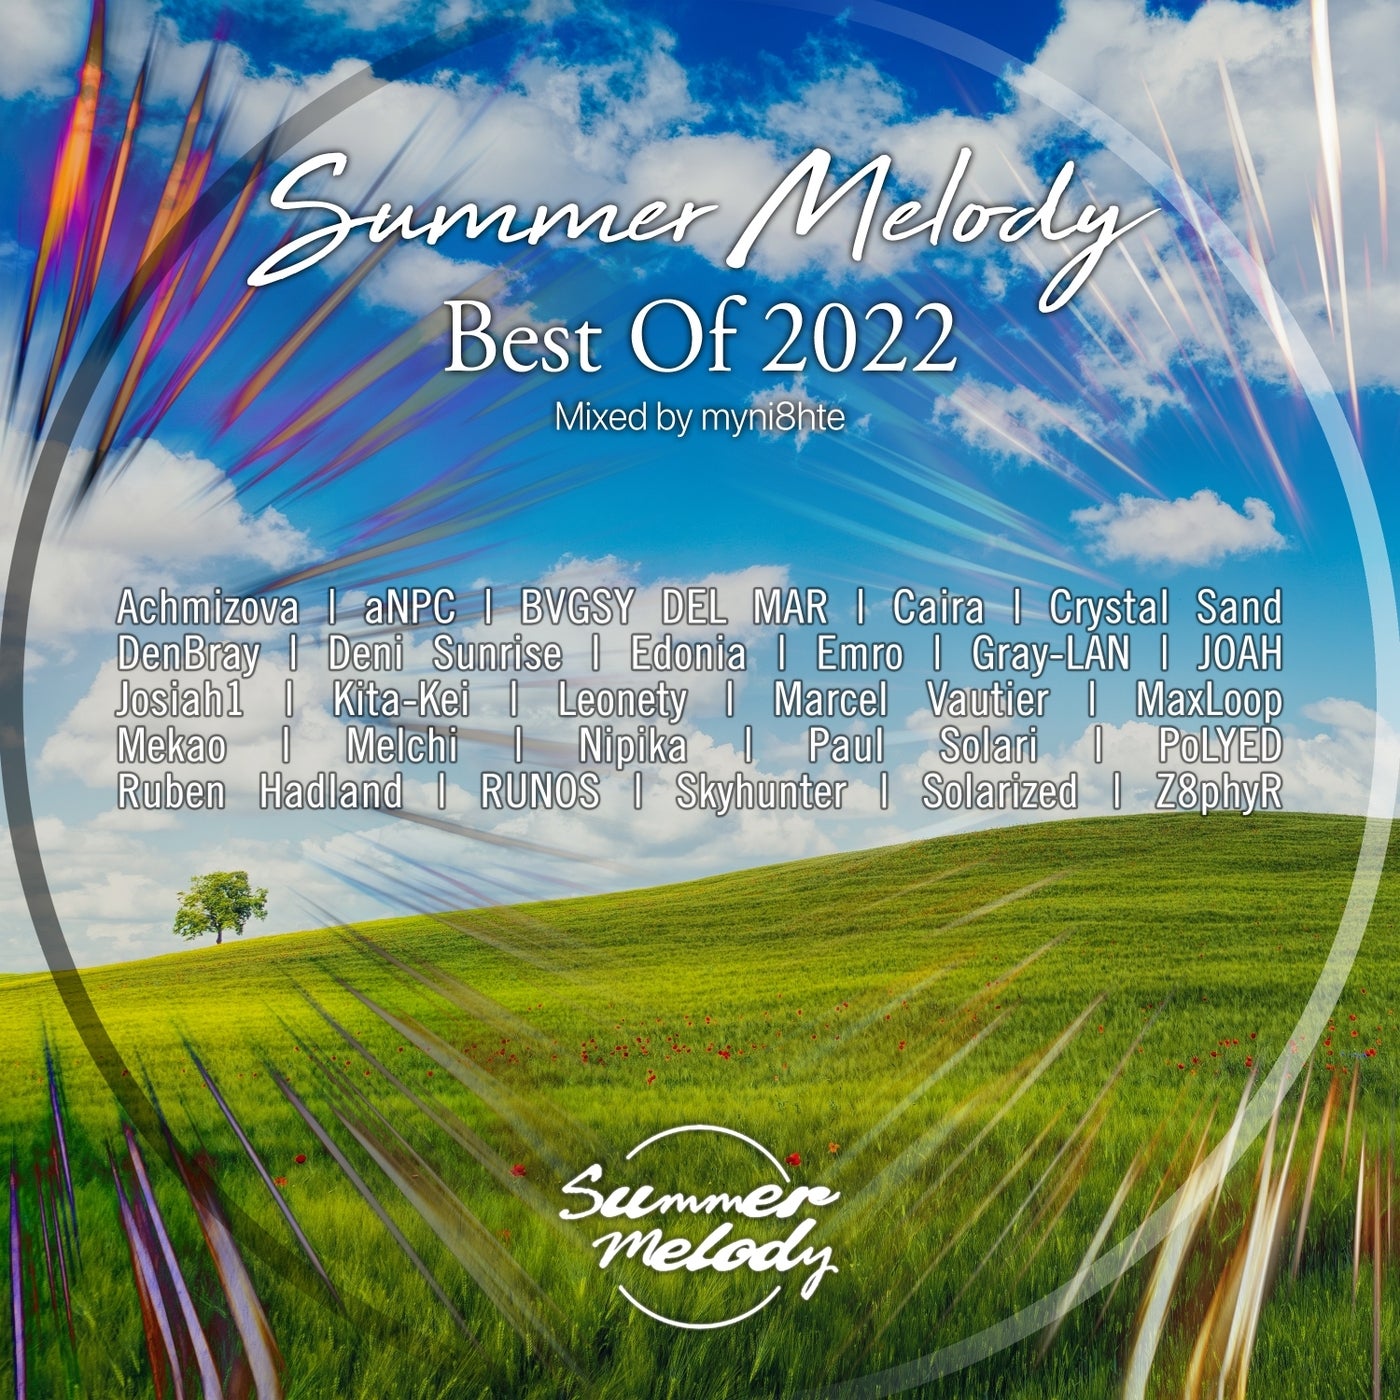 Summer Melody - Best of 2022